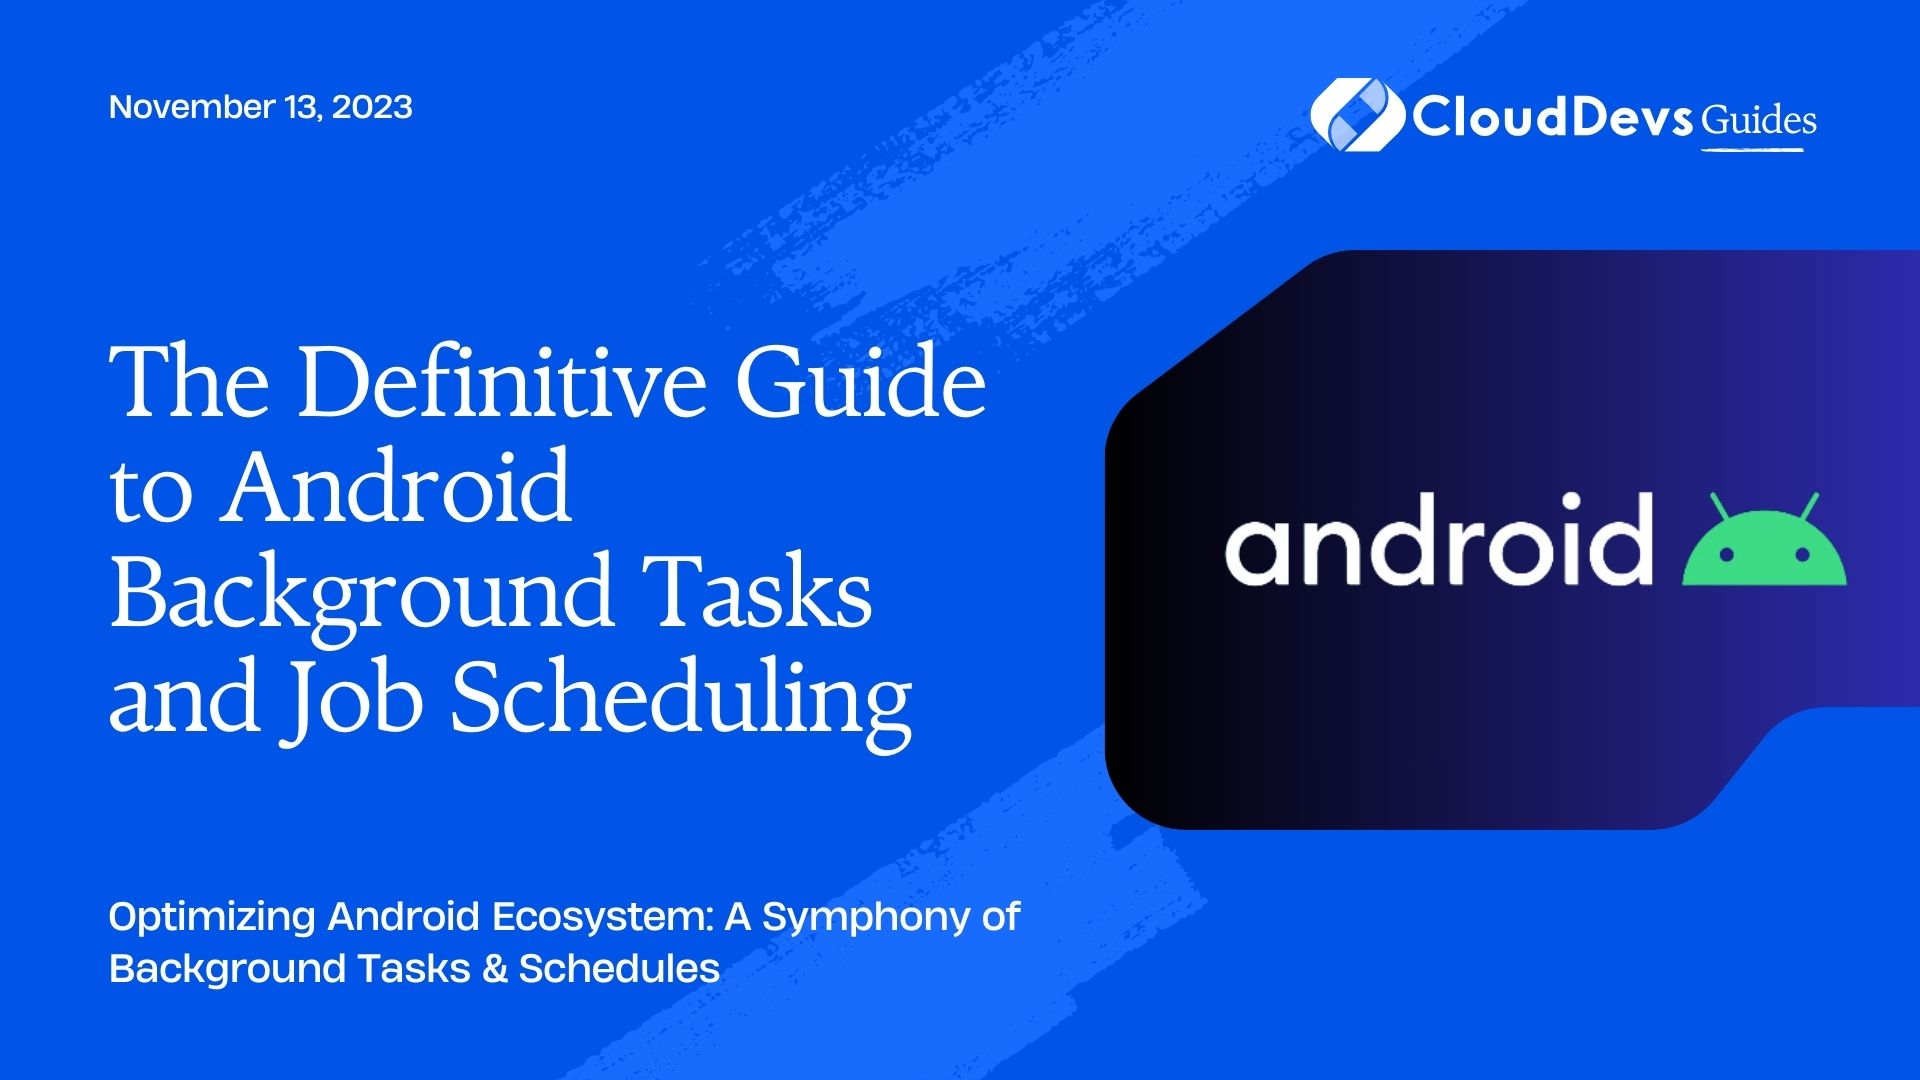 The Definitive Guide to Android Background Tasks and Job Scheduling